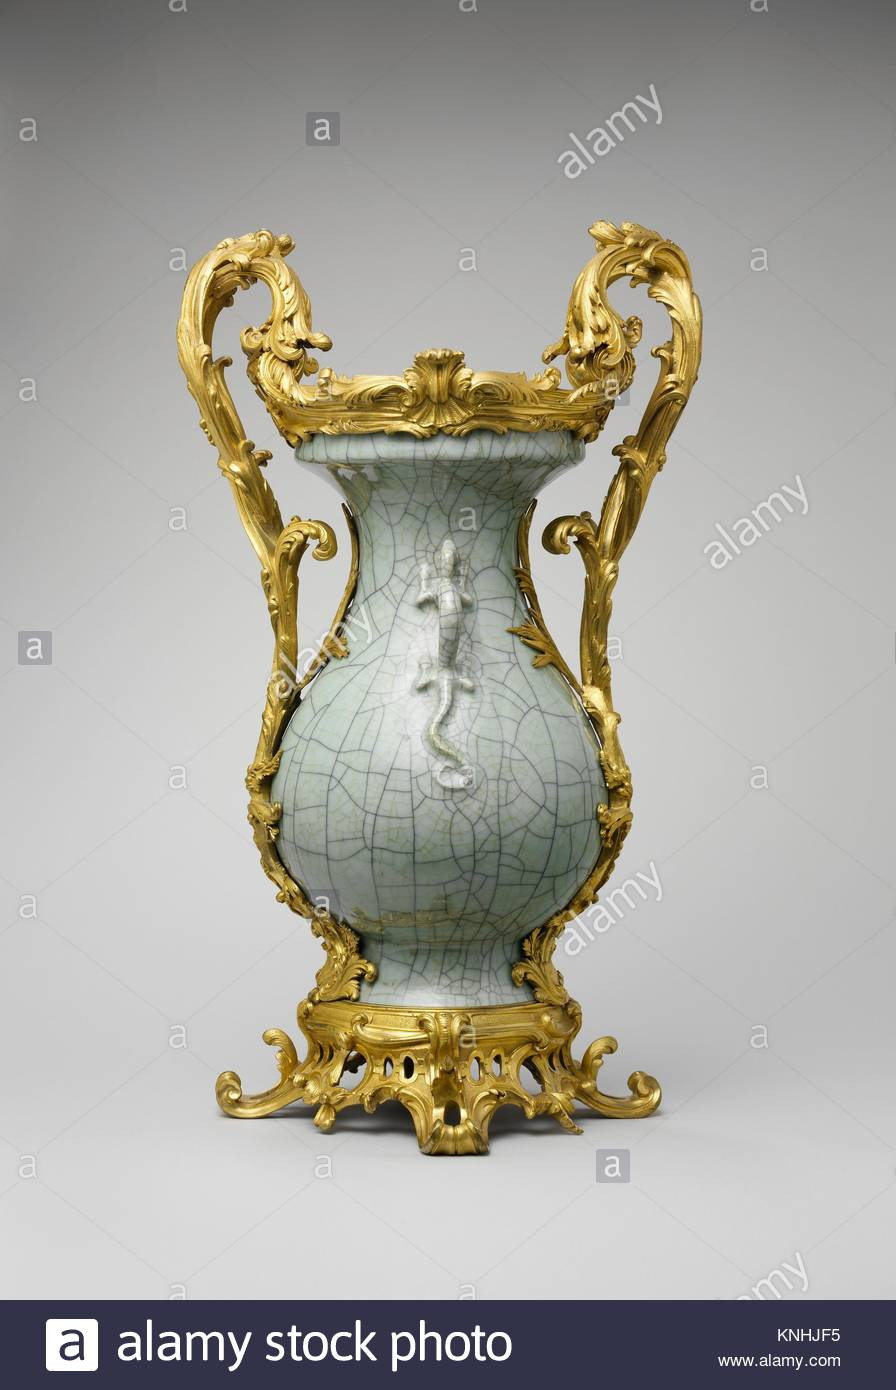 24 attractive Satsuma Vase with Handles 2023 free download satsuma vase with handles of chinese porcelain 18th century stock photos chinese porcelain 18th for mounted vase date porcelain early 18th century mounts ca 1750 culture